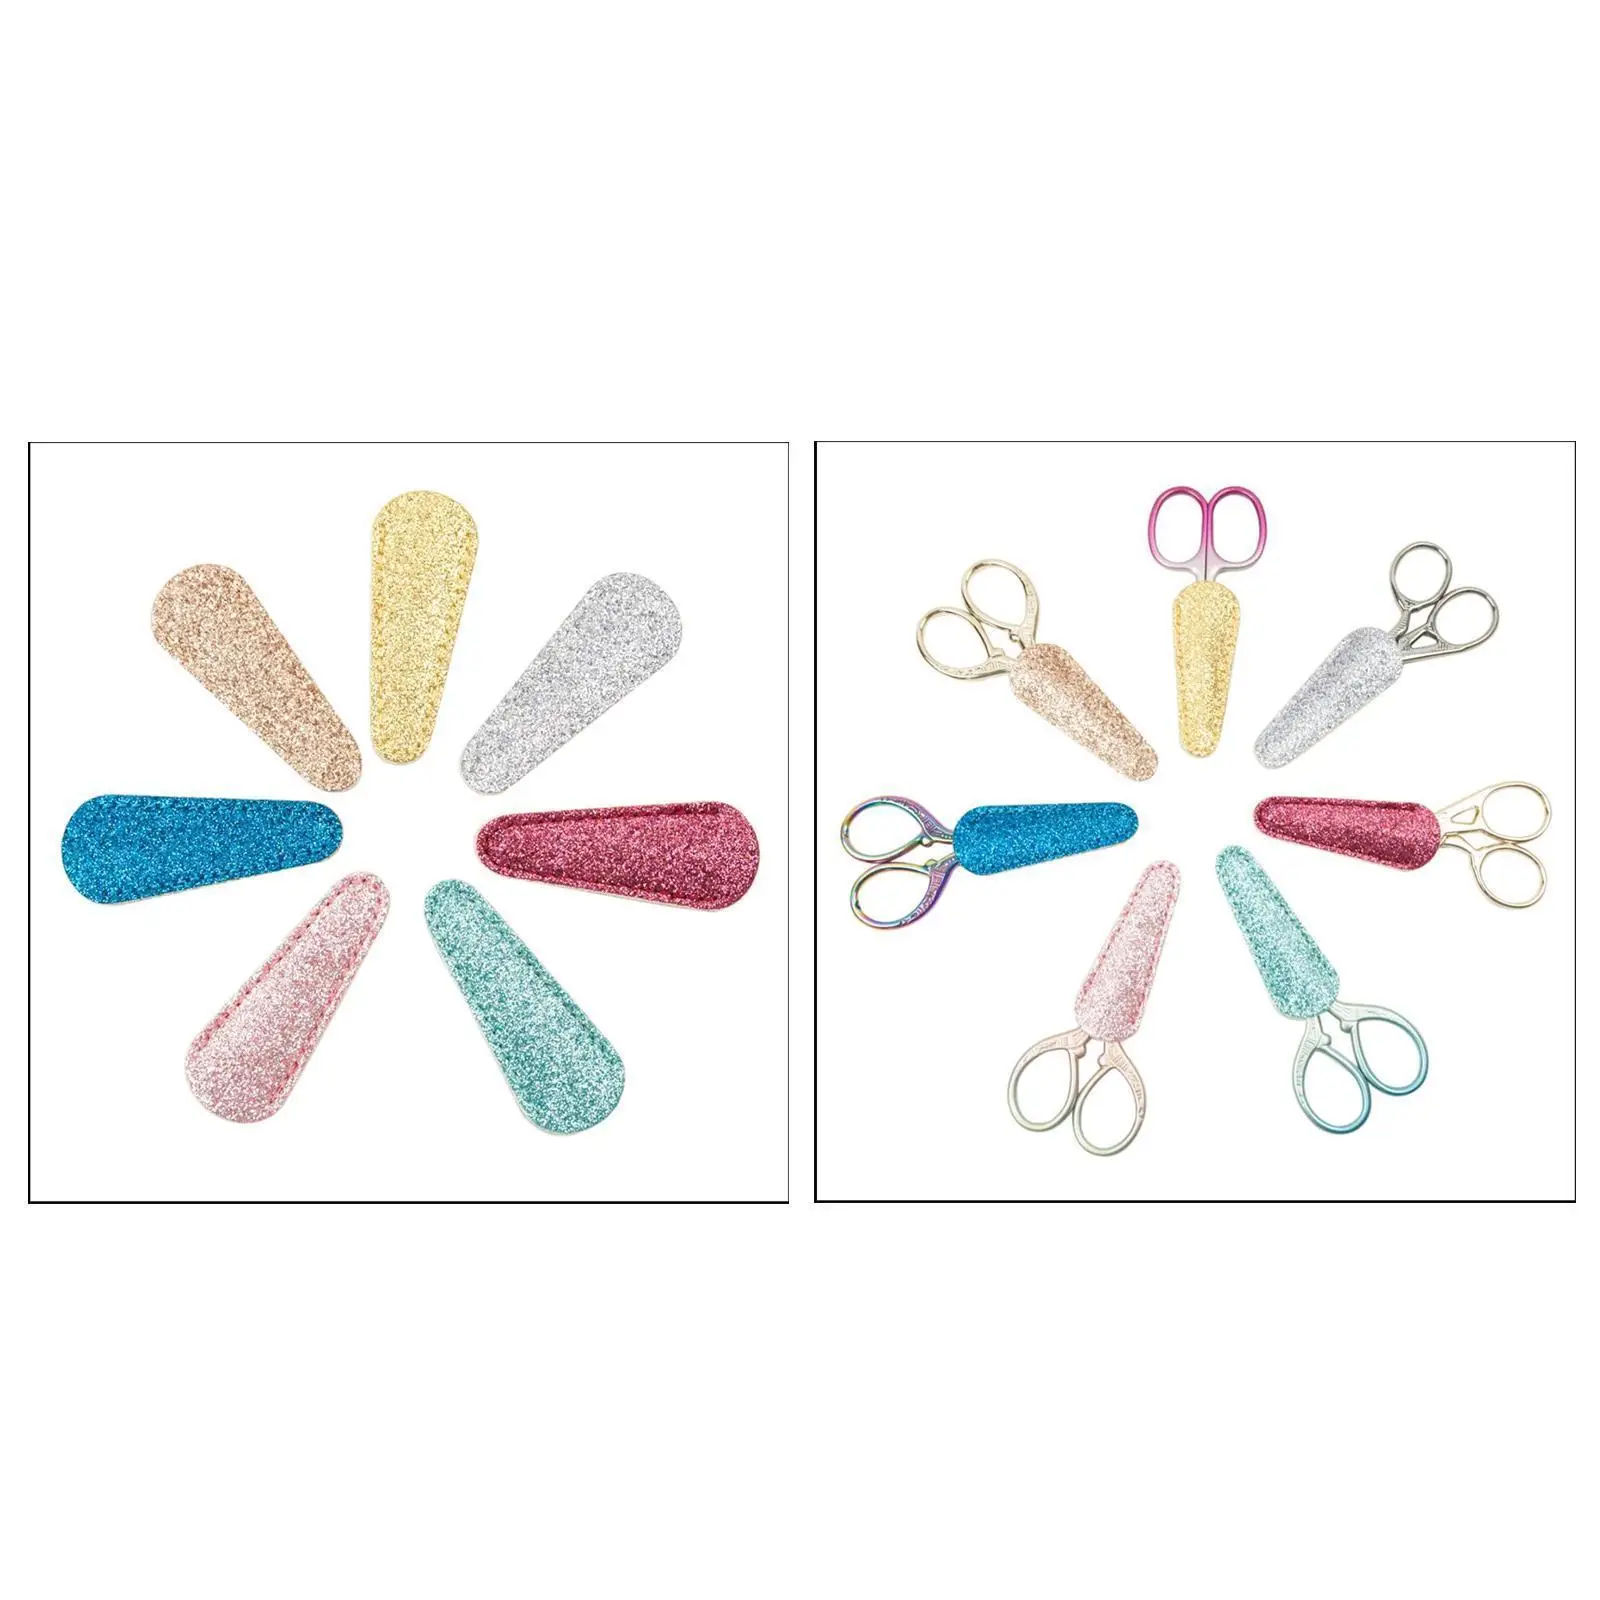 7Pcs Shining Embroidery Scissors Sheath Sewing Protector Cover Bags Trimming